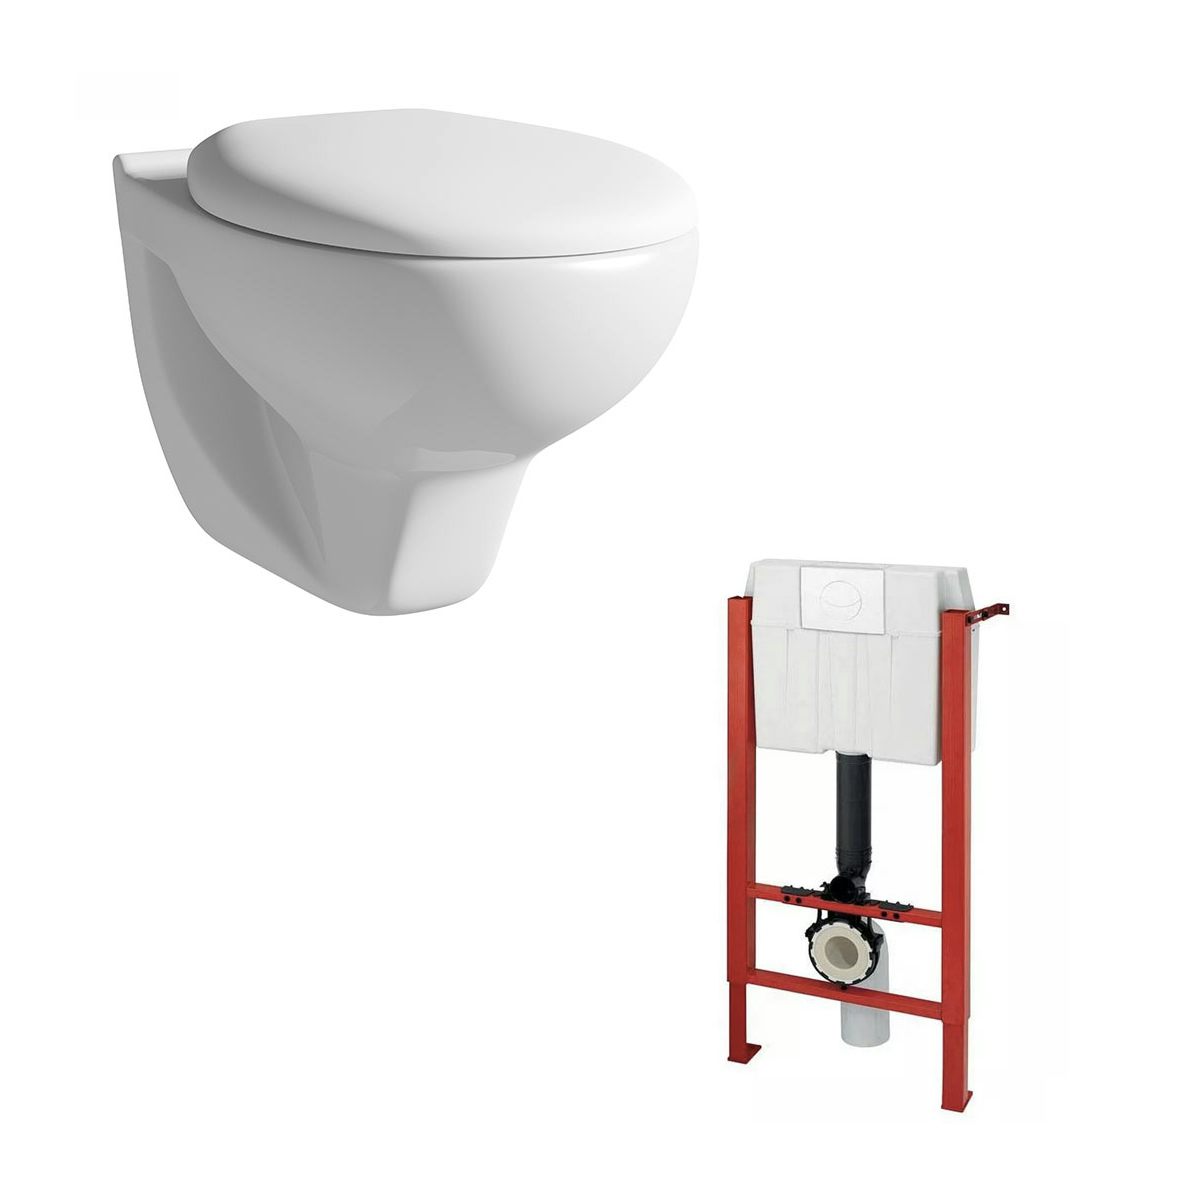 Orchard Elena wall hung toilet and wall mounting frame